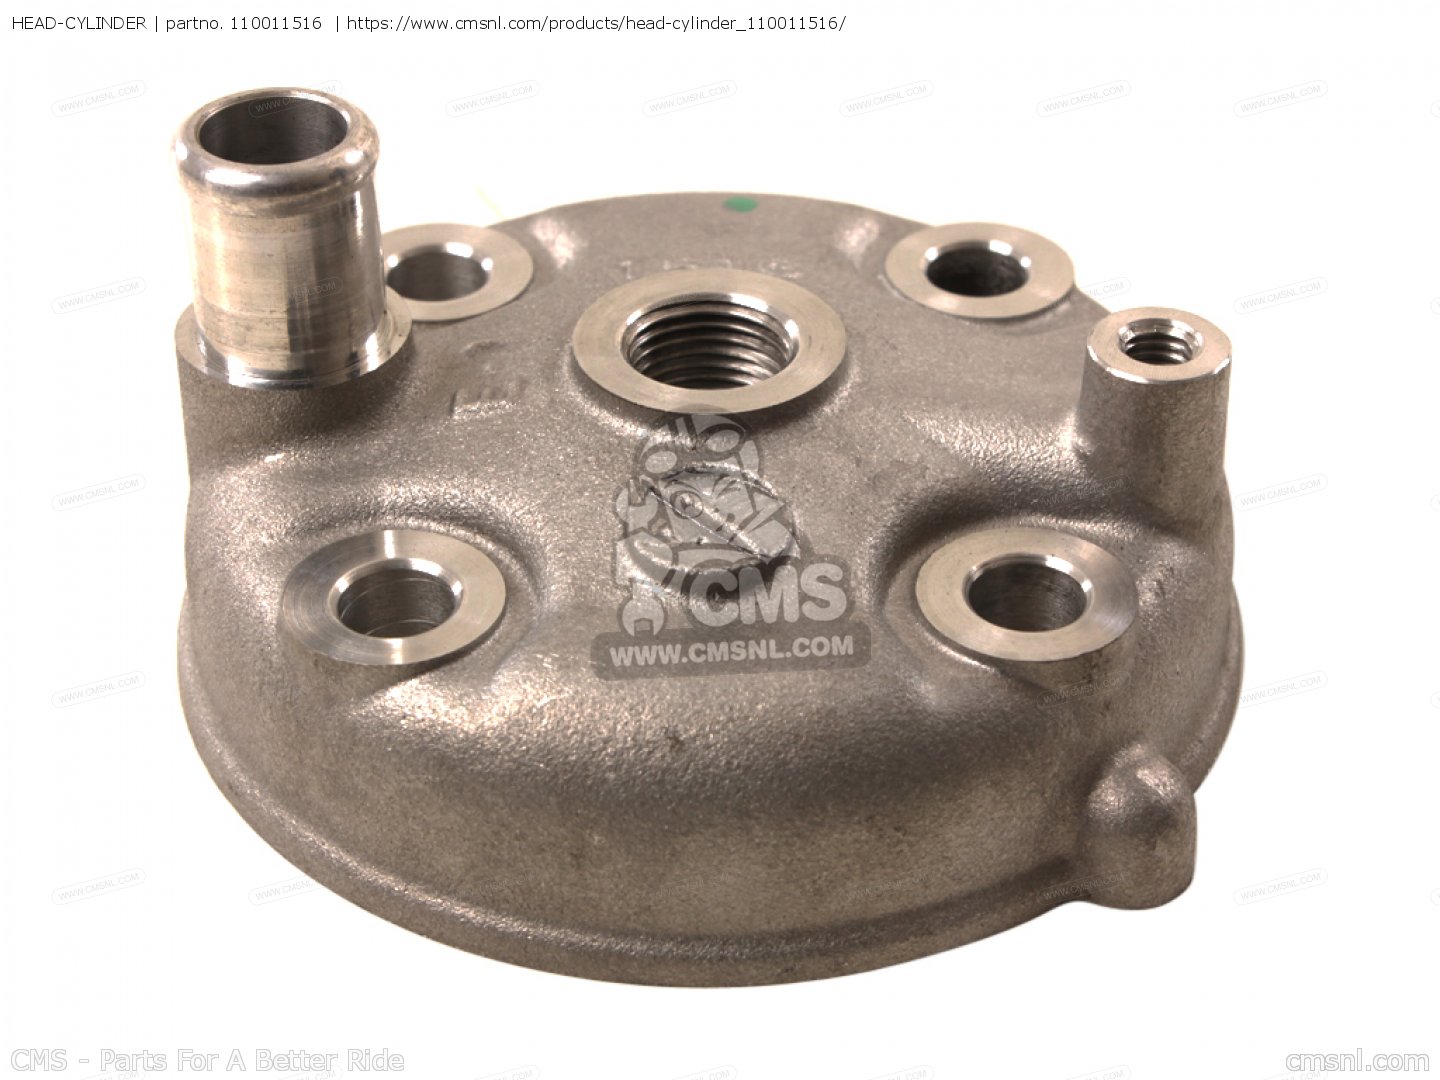 HEAD-CYLINDER for KX65-ACF 2012 USA order at CMSNL